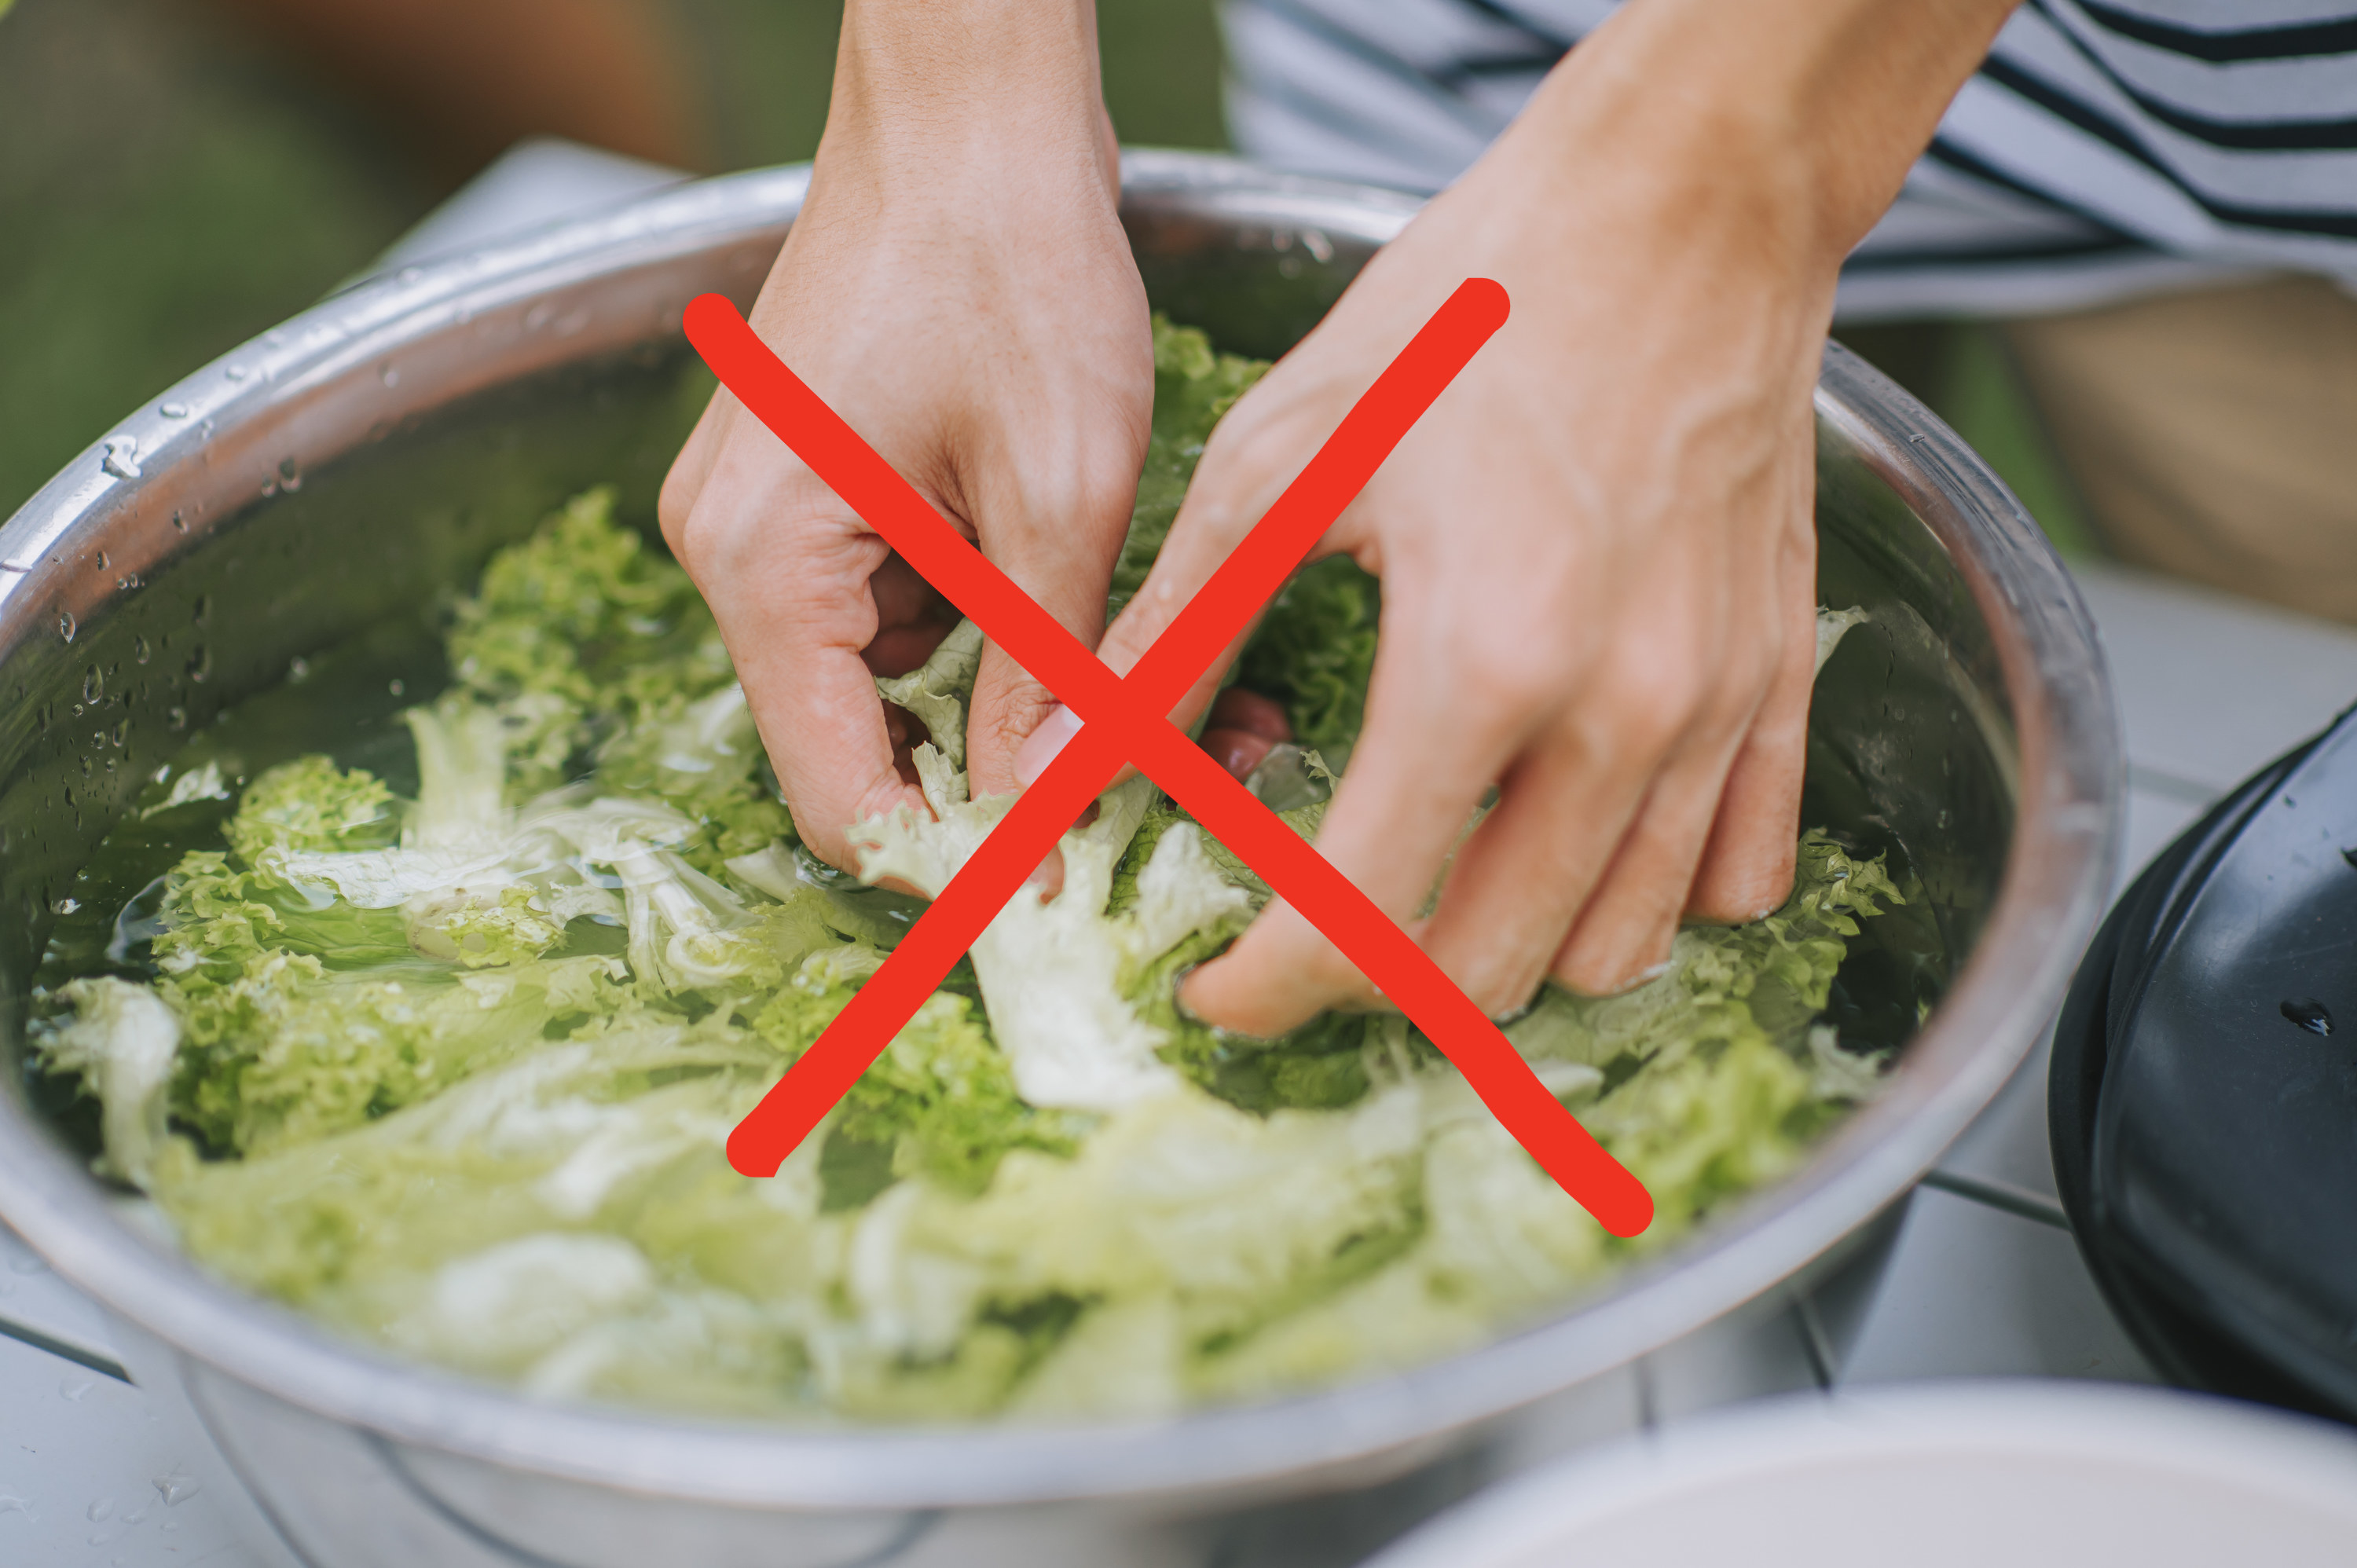 An X over a picture of a person washing broccoli in a bowl of water